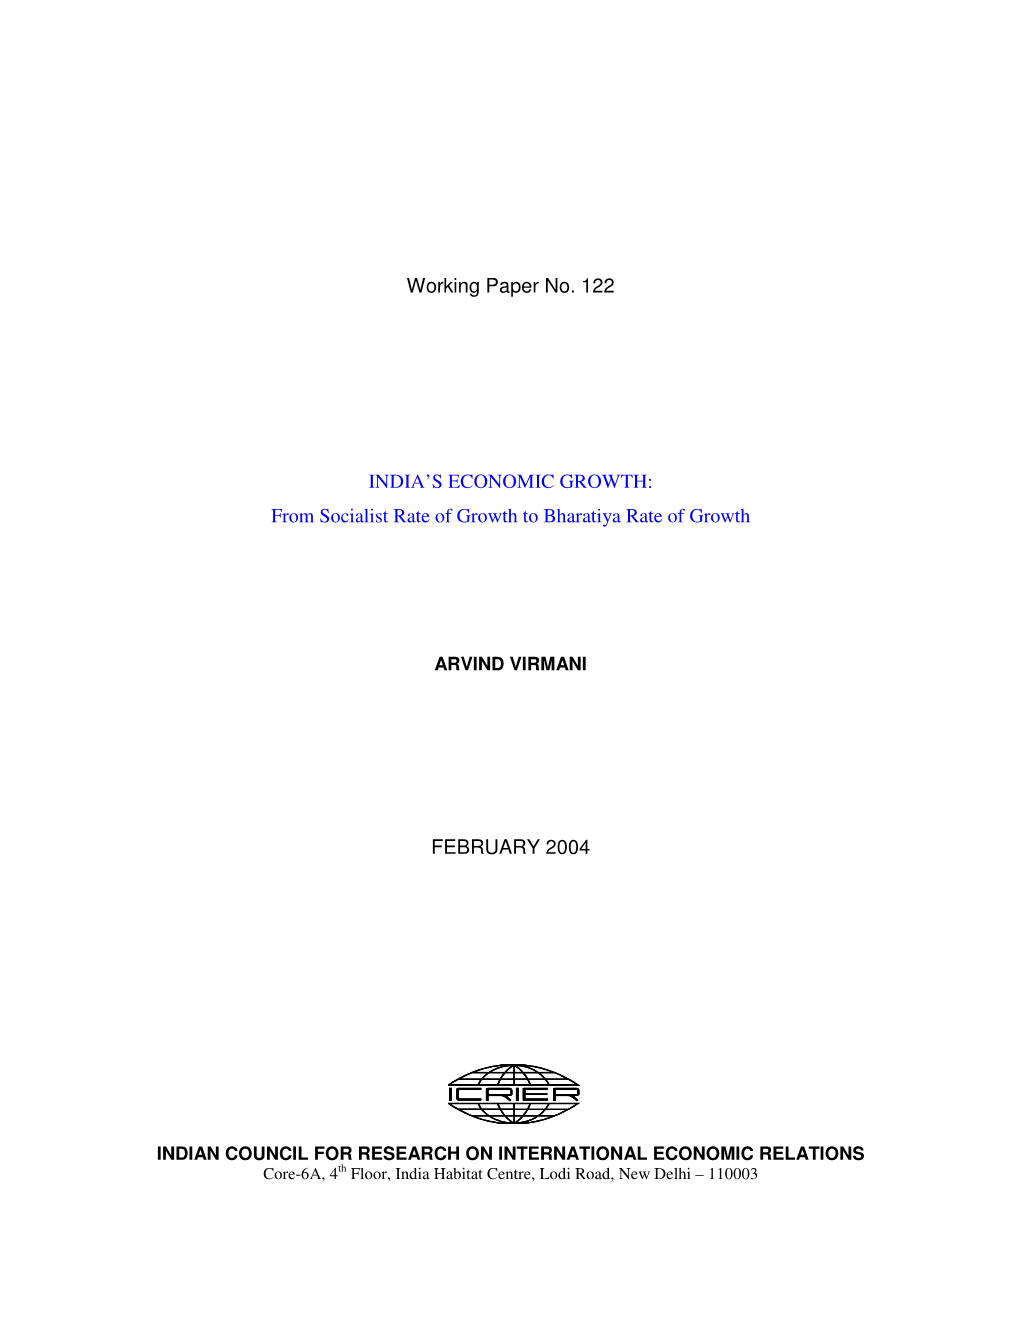 Working Paper No. 122 INDIA's ECONOMIC GROWTH